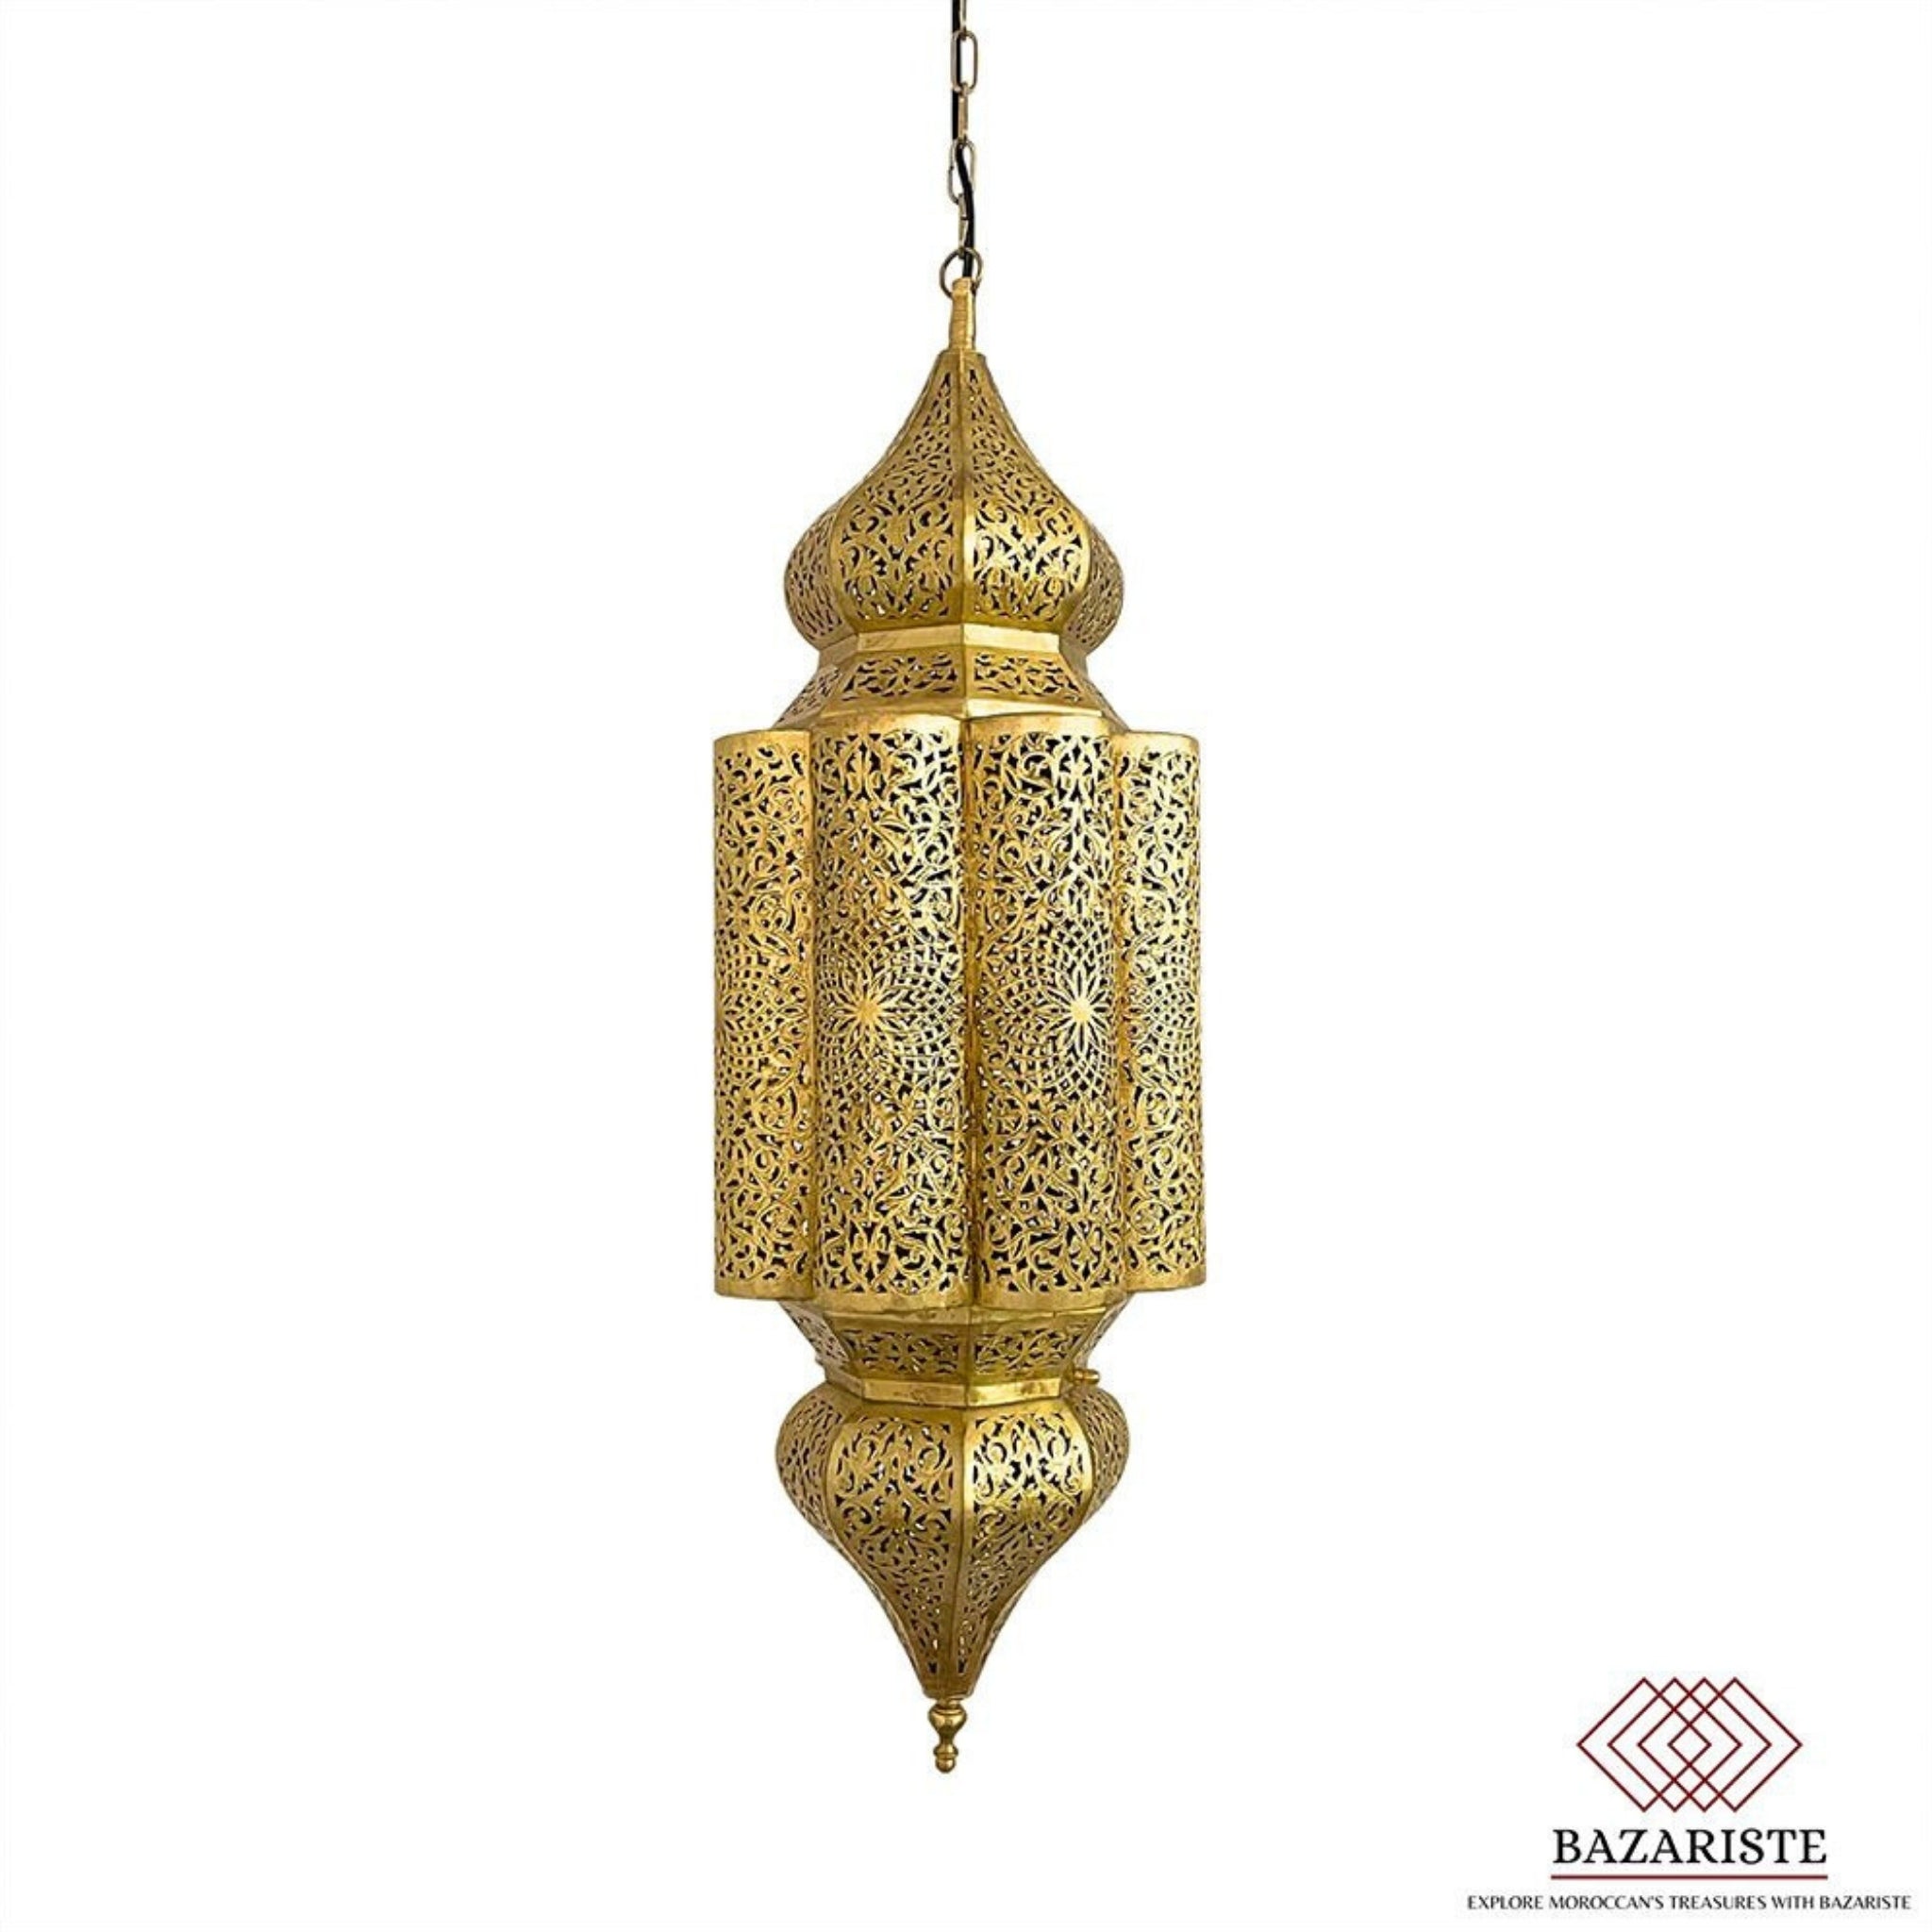 Moroccan chandelier Pendant Light, Hanging Ceiling Lamp Shade, Moroccan Lamp